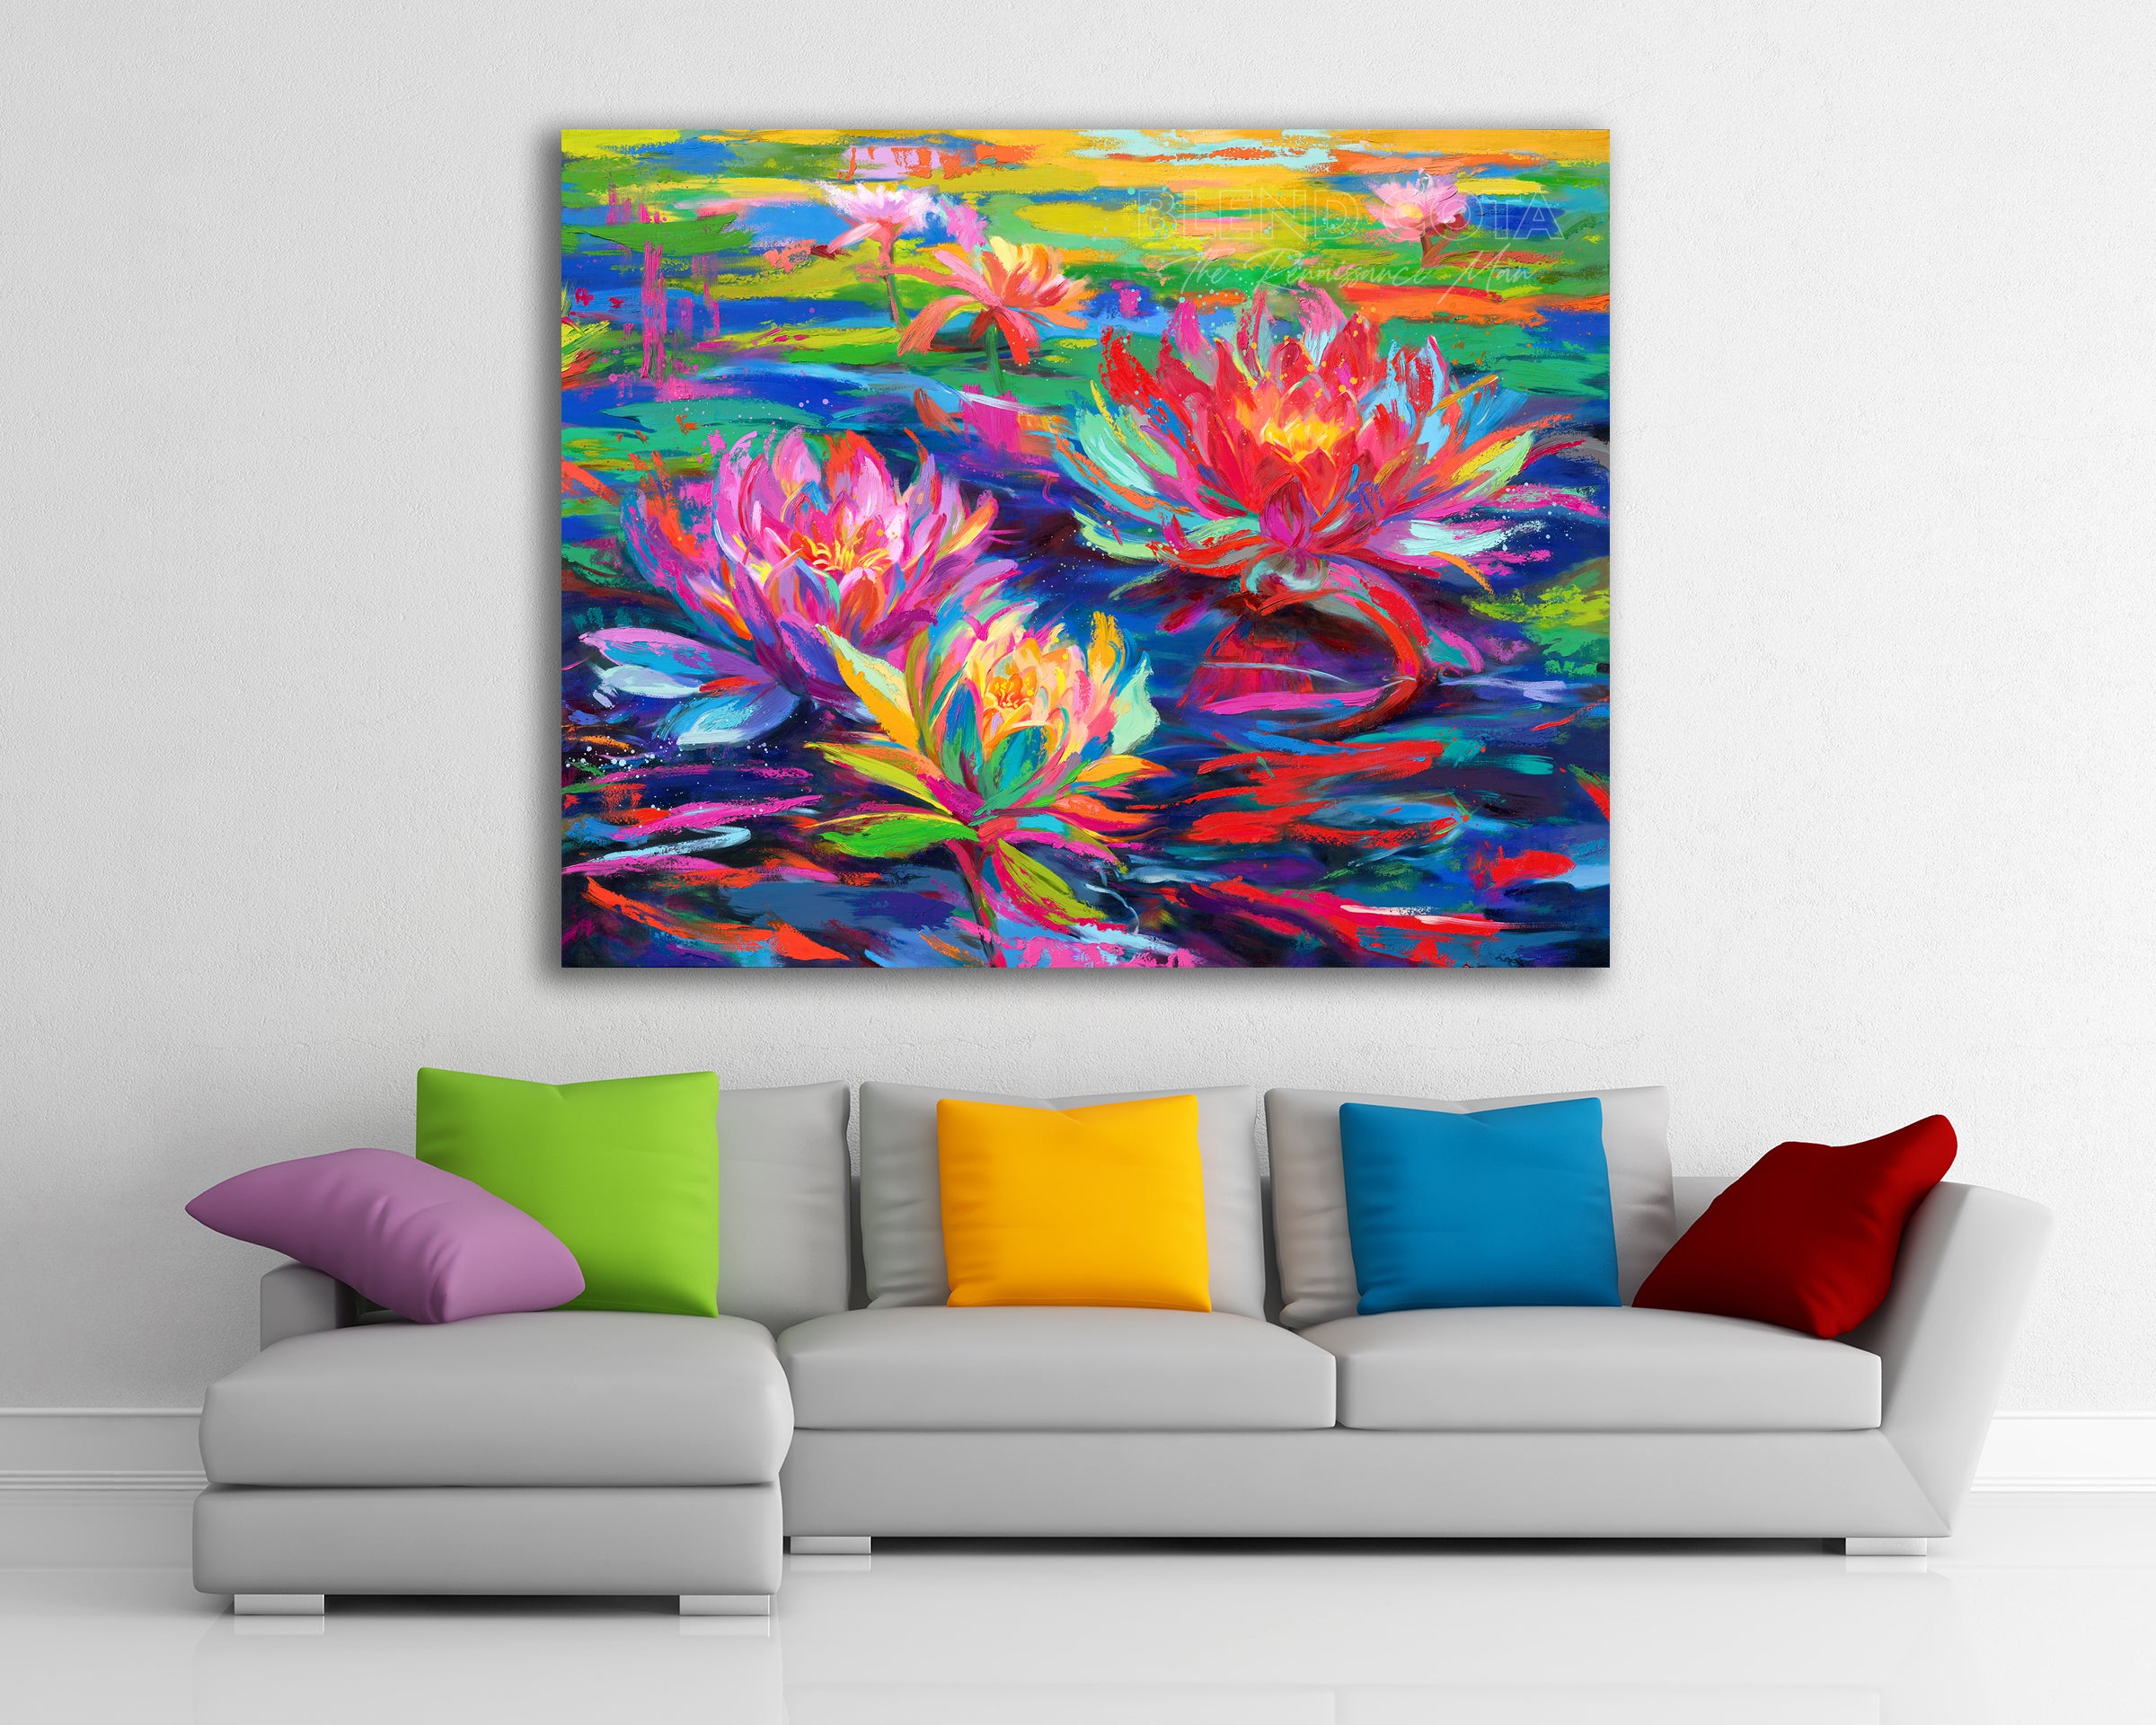 Room setting for Oil on canvas original painting of red, pink and yellow water lilies blooming in a pond of lily pads, abundant and vibrant flowers in colorful brushstrokes, color expressionism style.